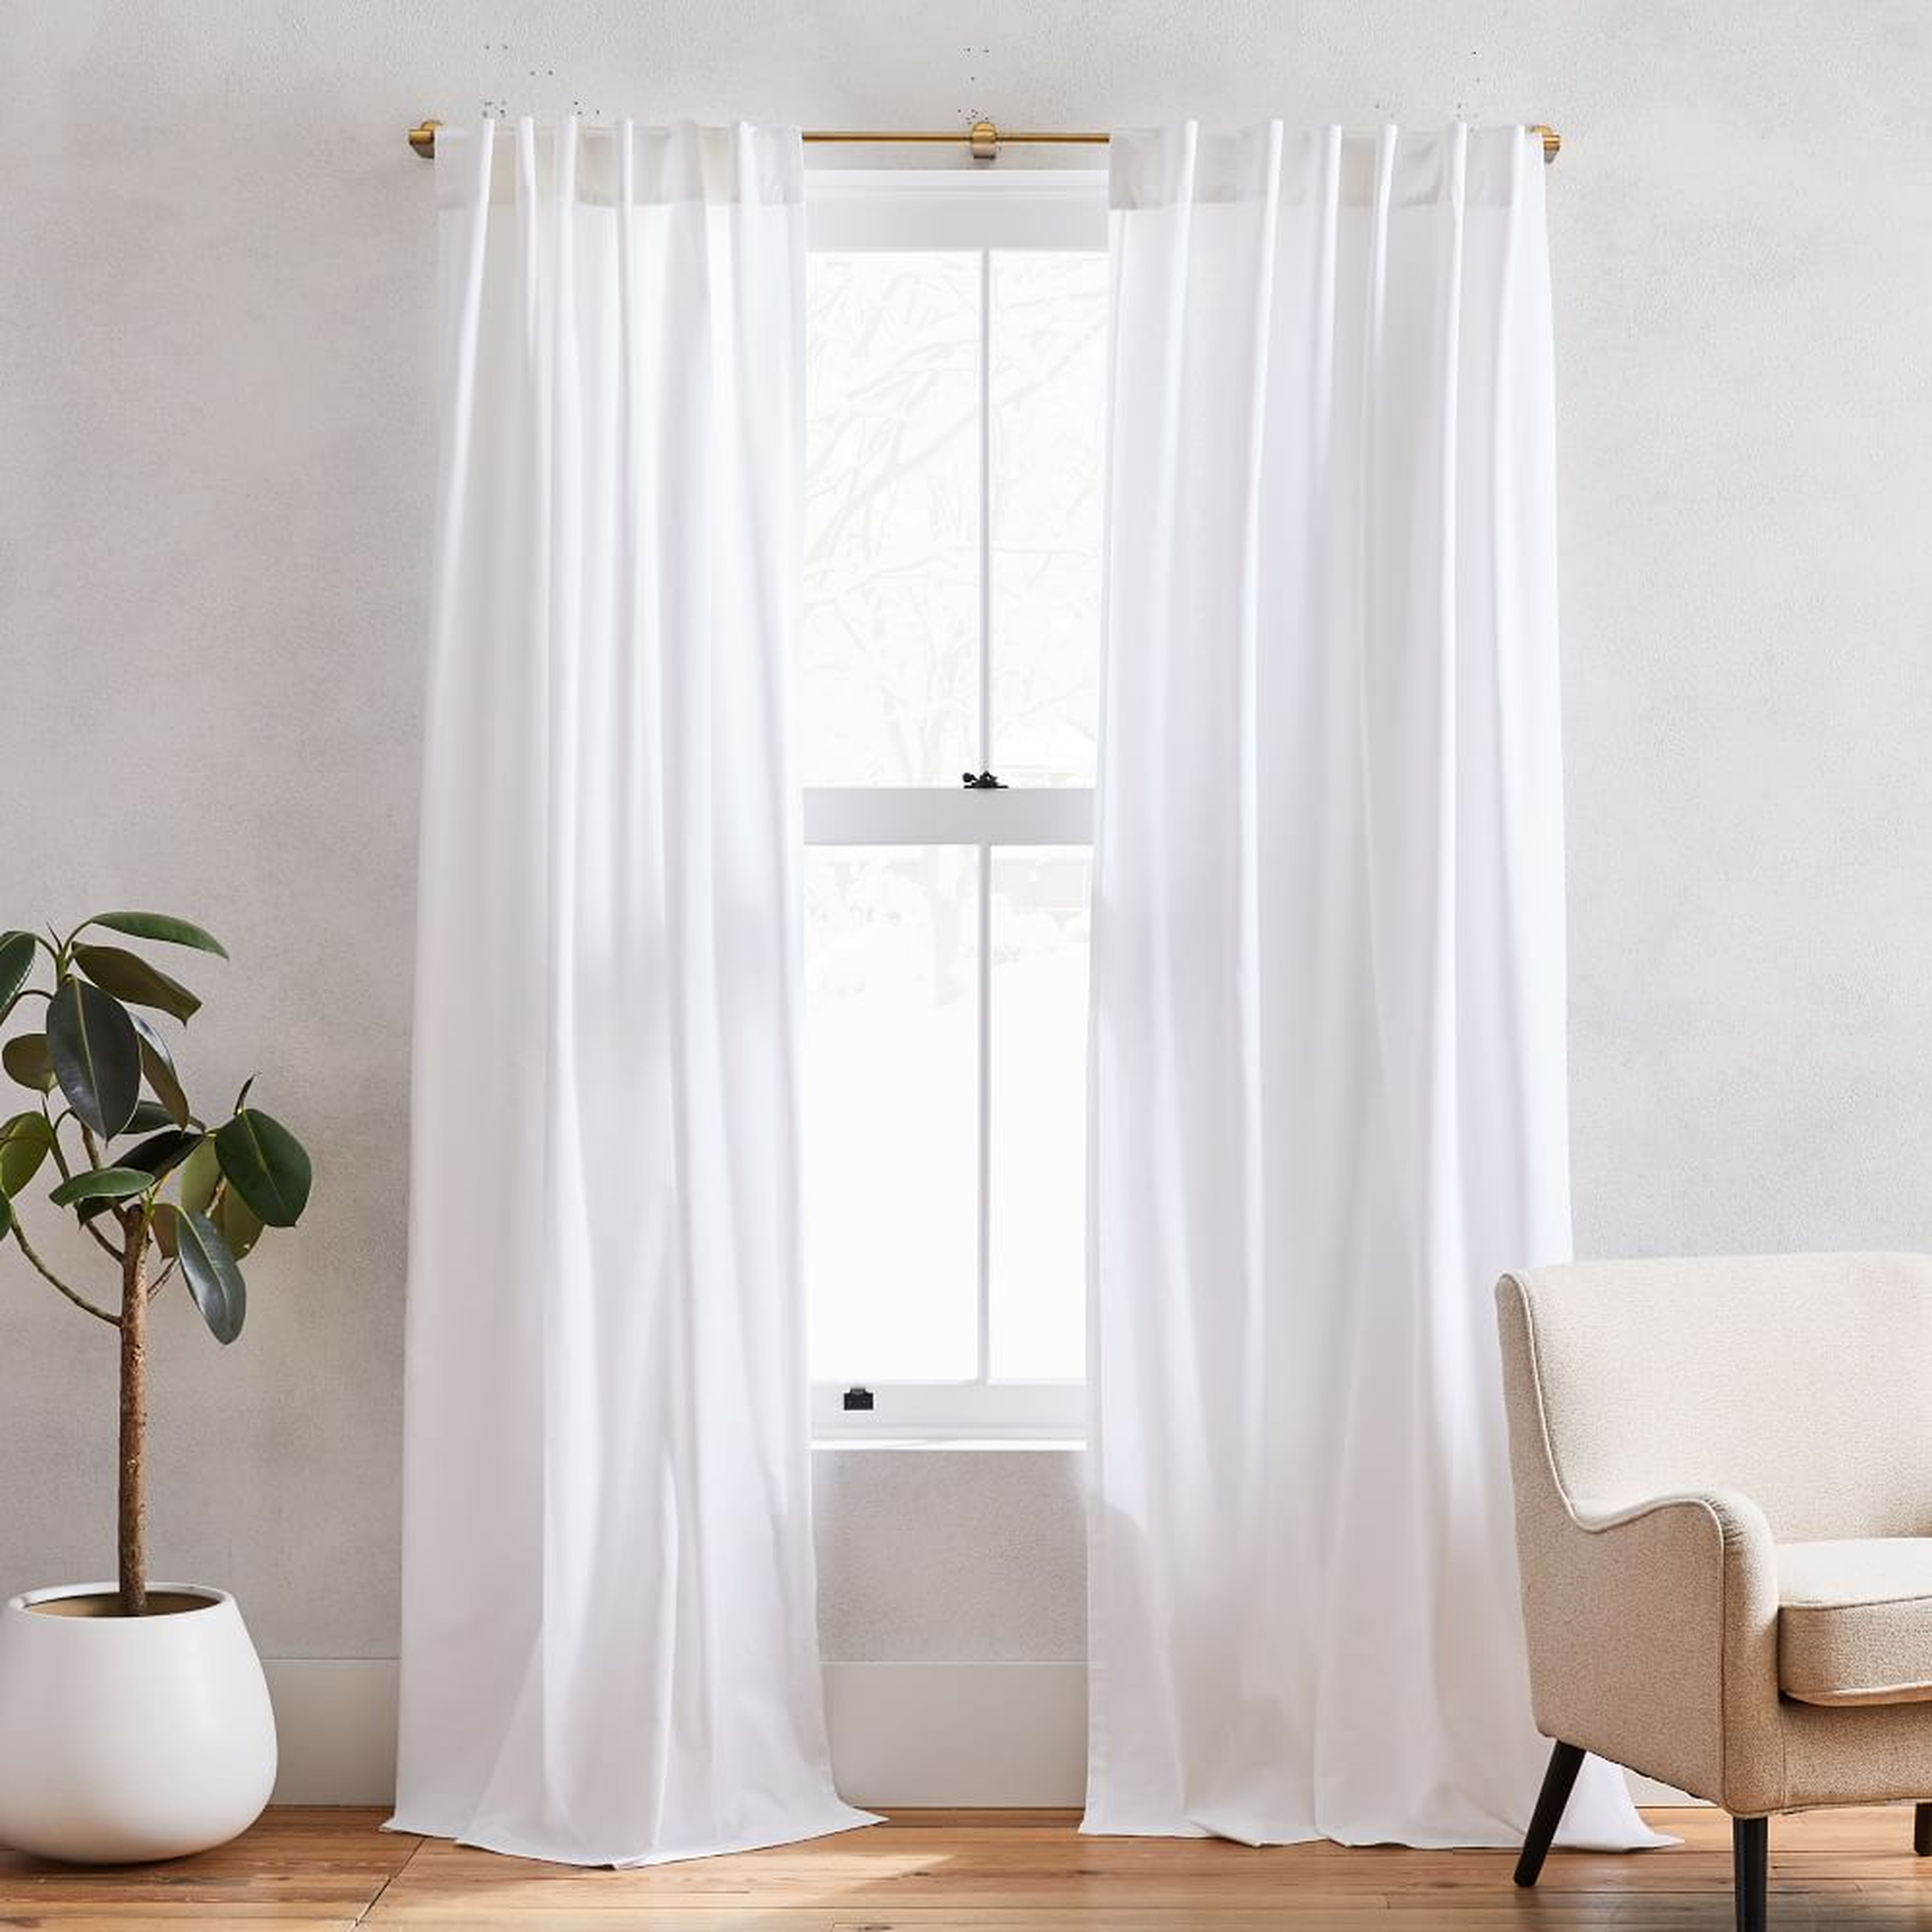 Cotton Canvas Curtain with Cotton Lining, White, 48"x108", Set of 2 - West Elm